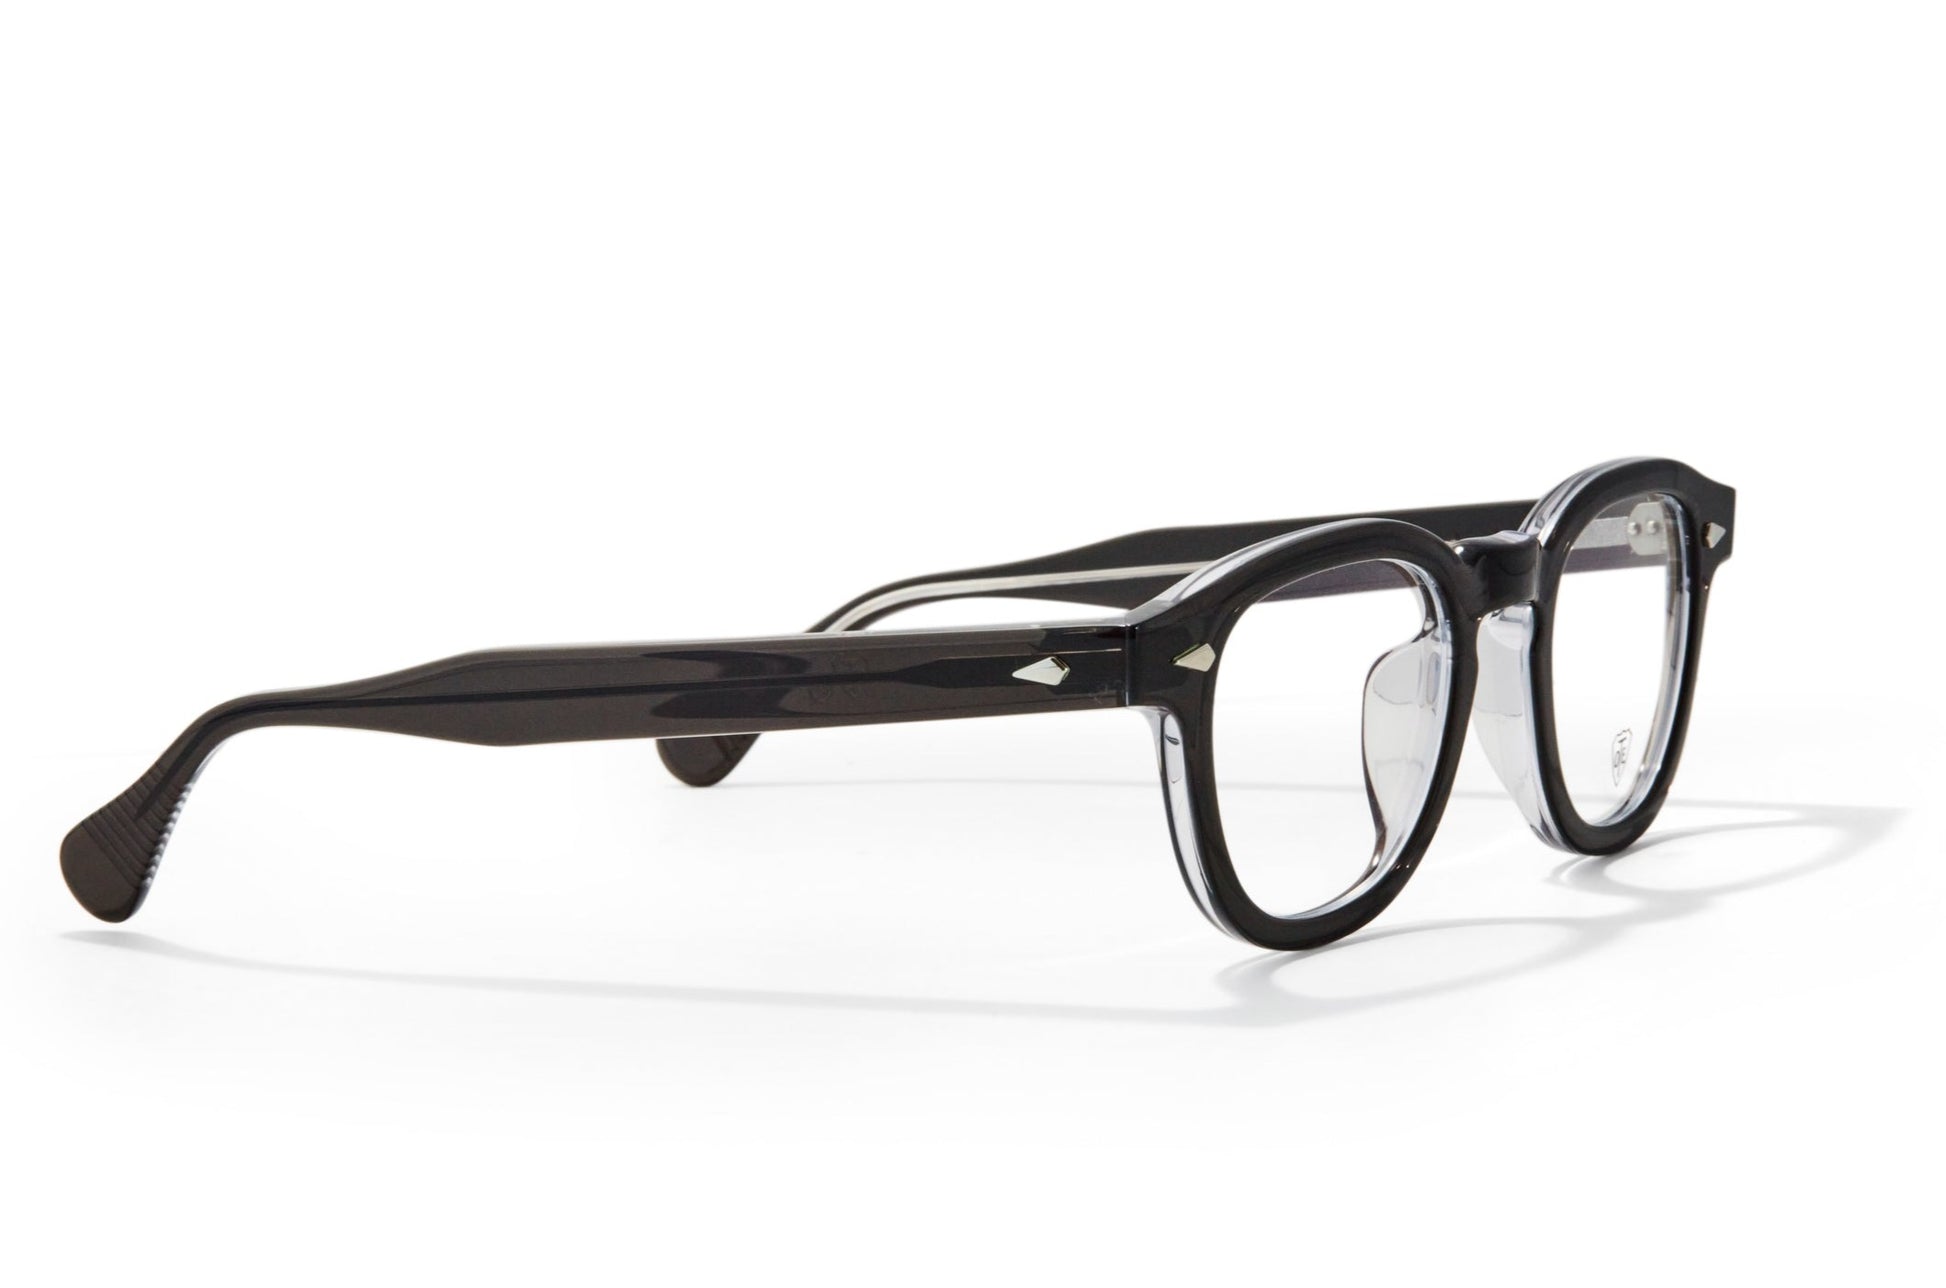 A side view of the smoke gray Arnel frame—the classic eyeglasses. 